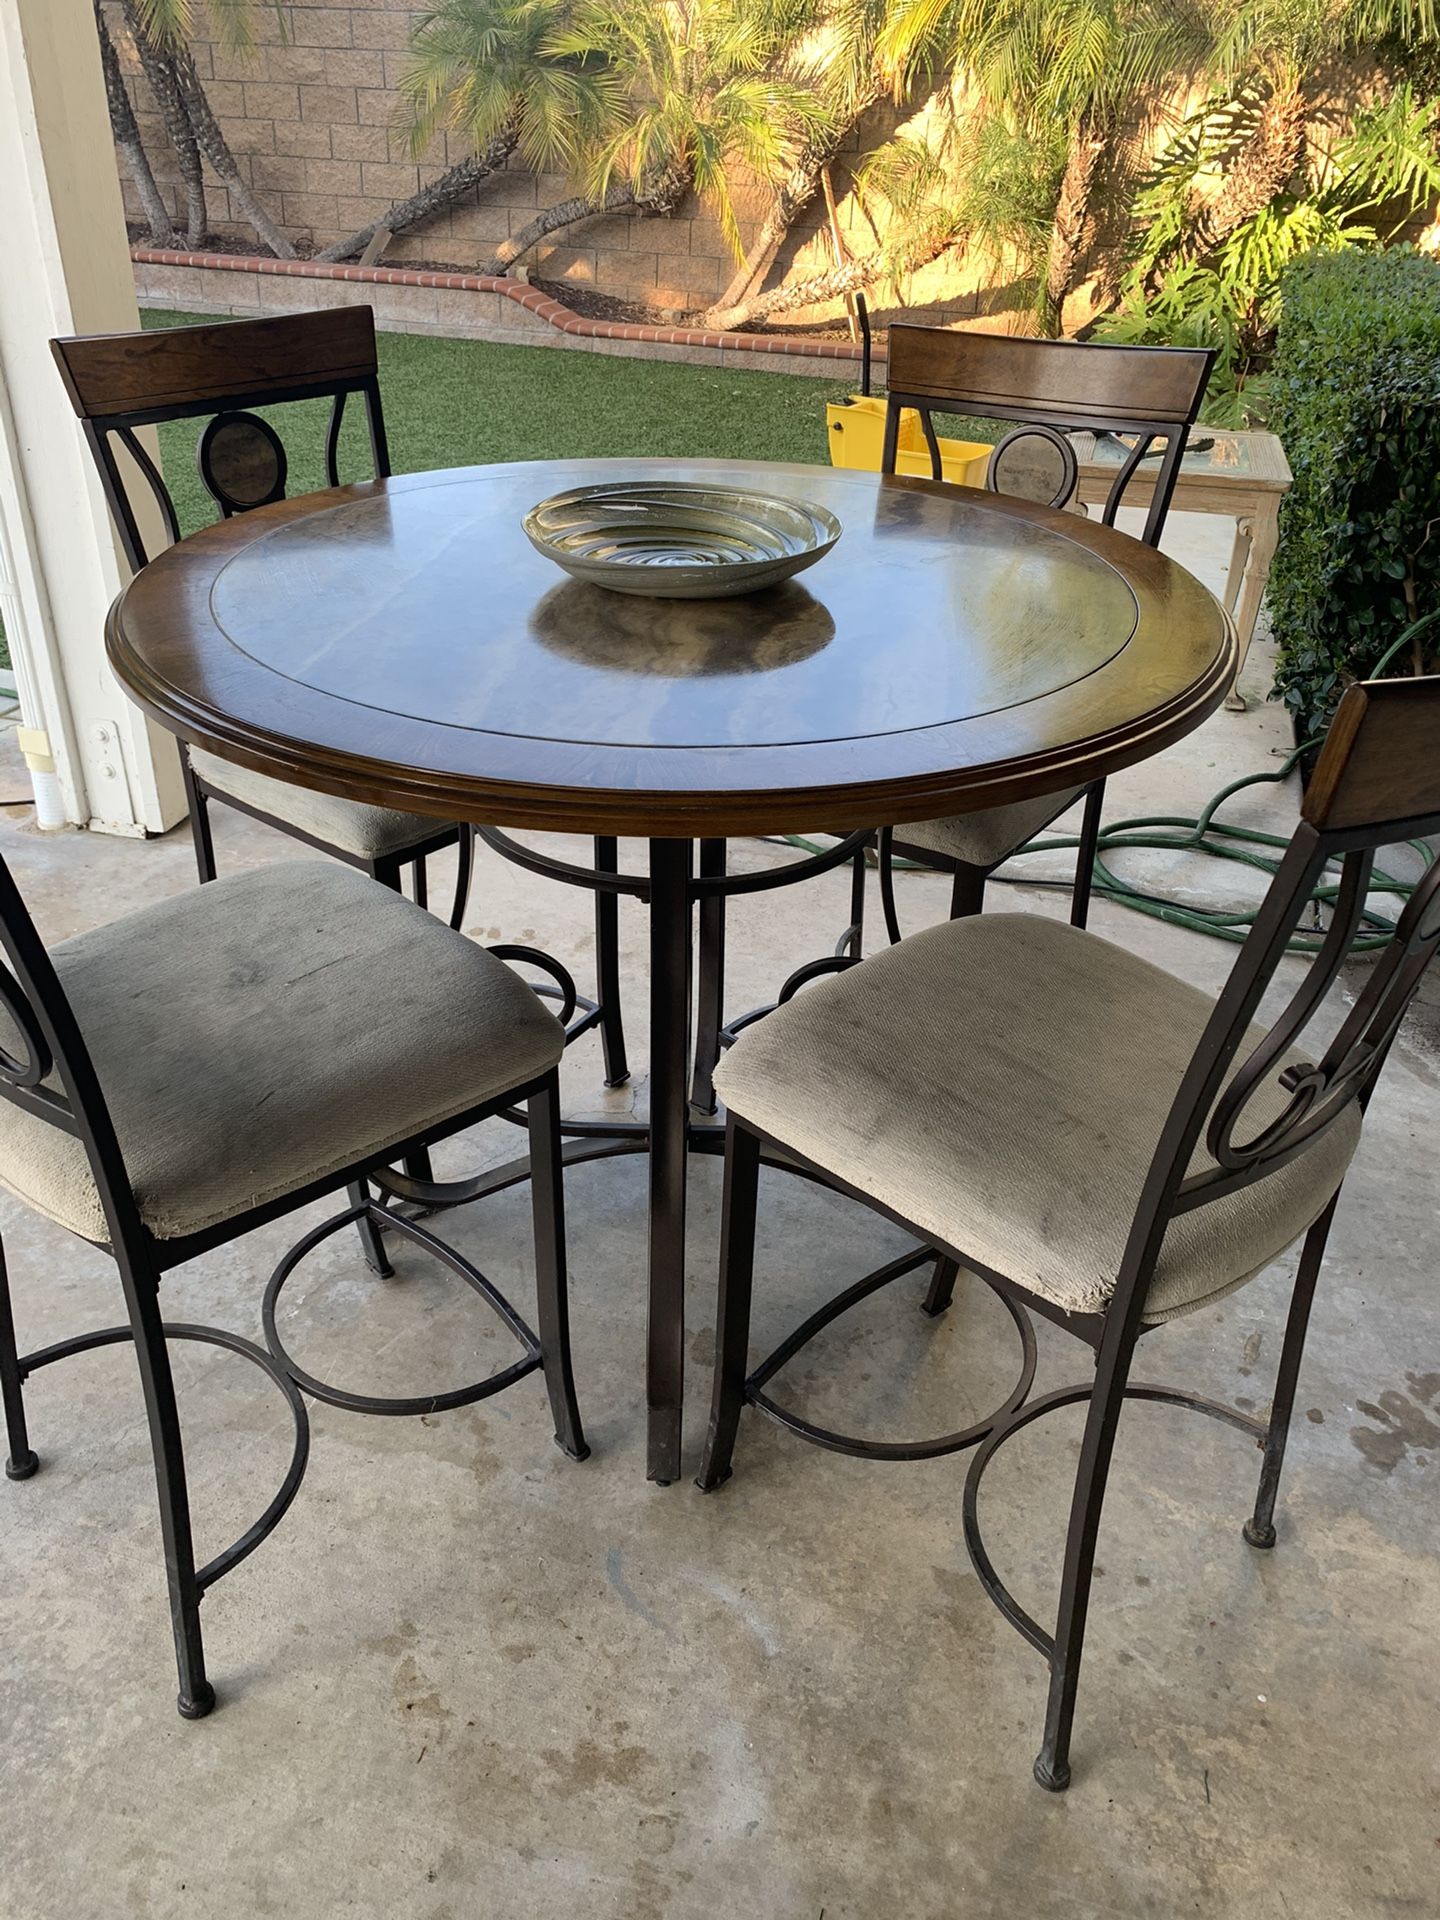 FREE!! Table & Chairs